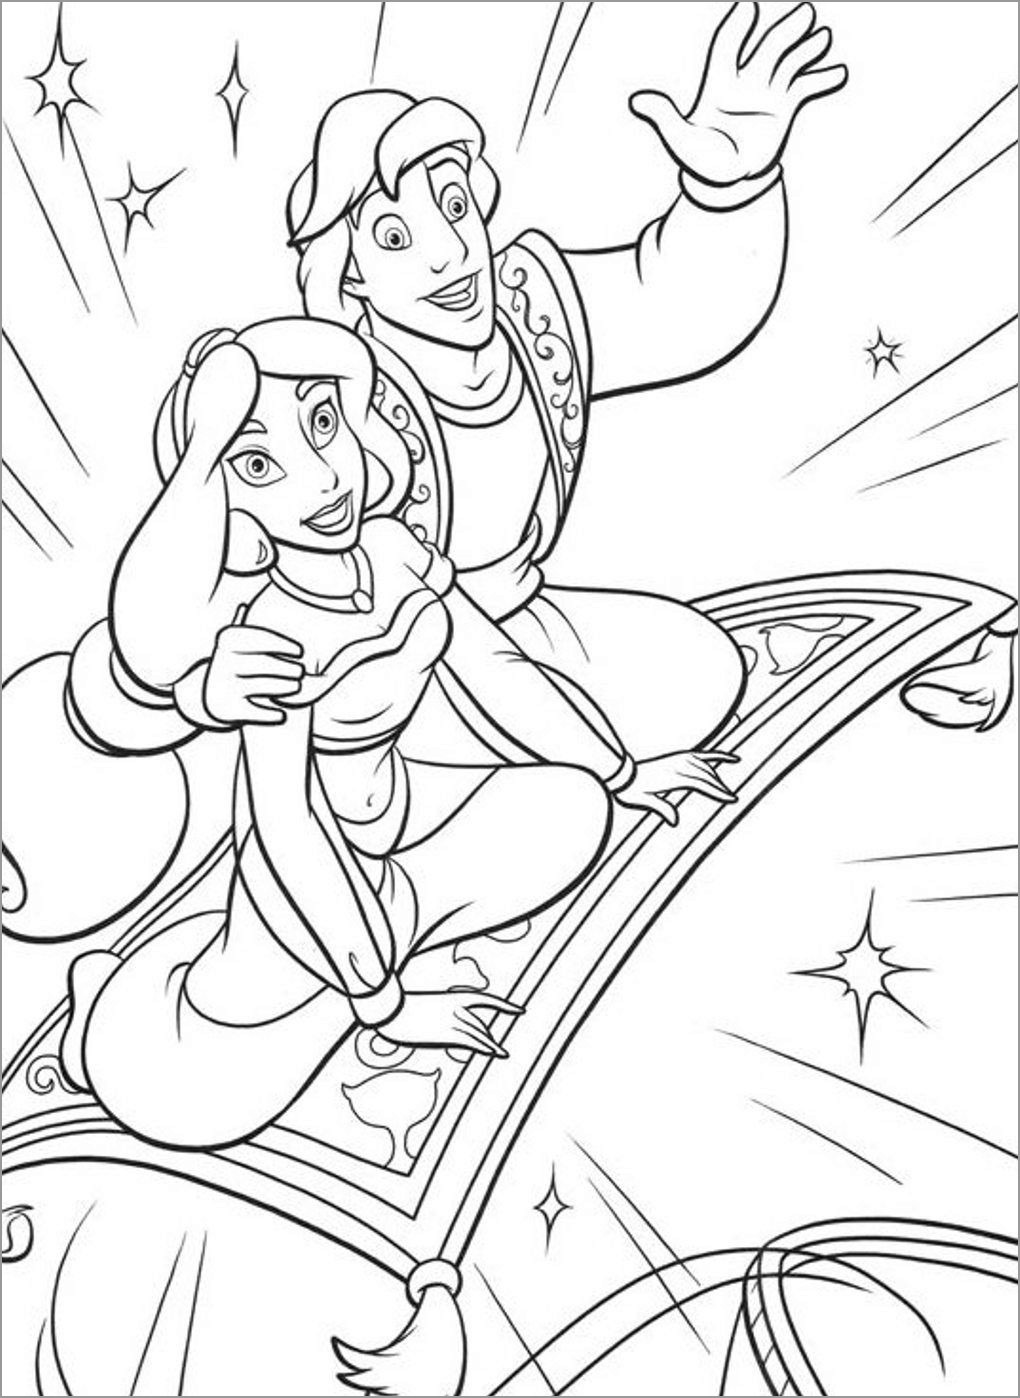 Aladdin and Jasmine Flying with Magic Carpet Coloring Page